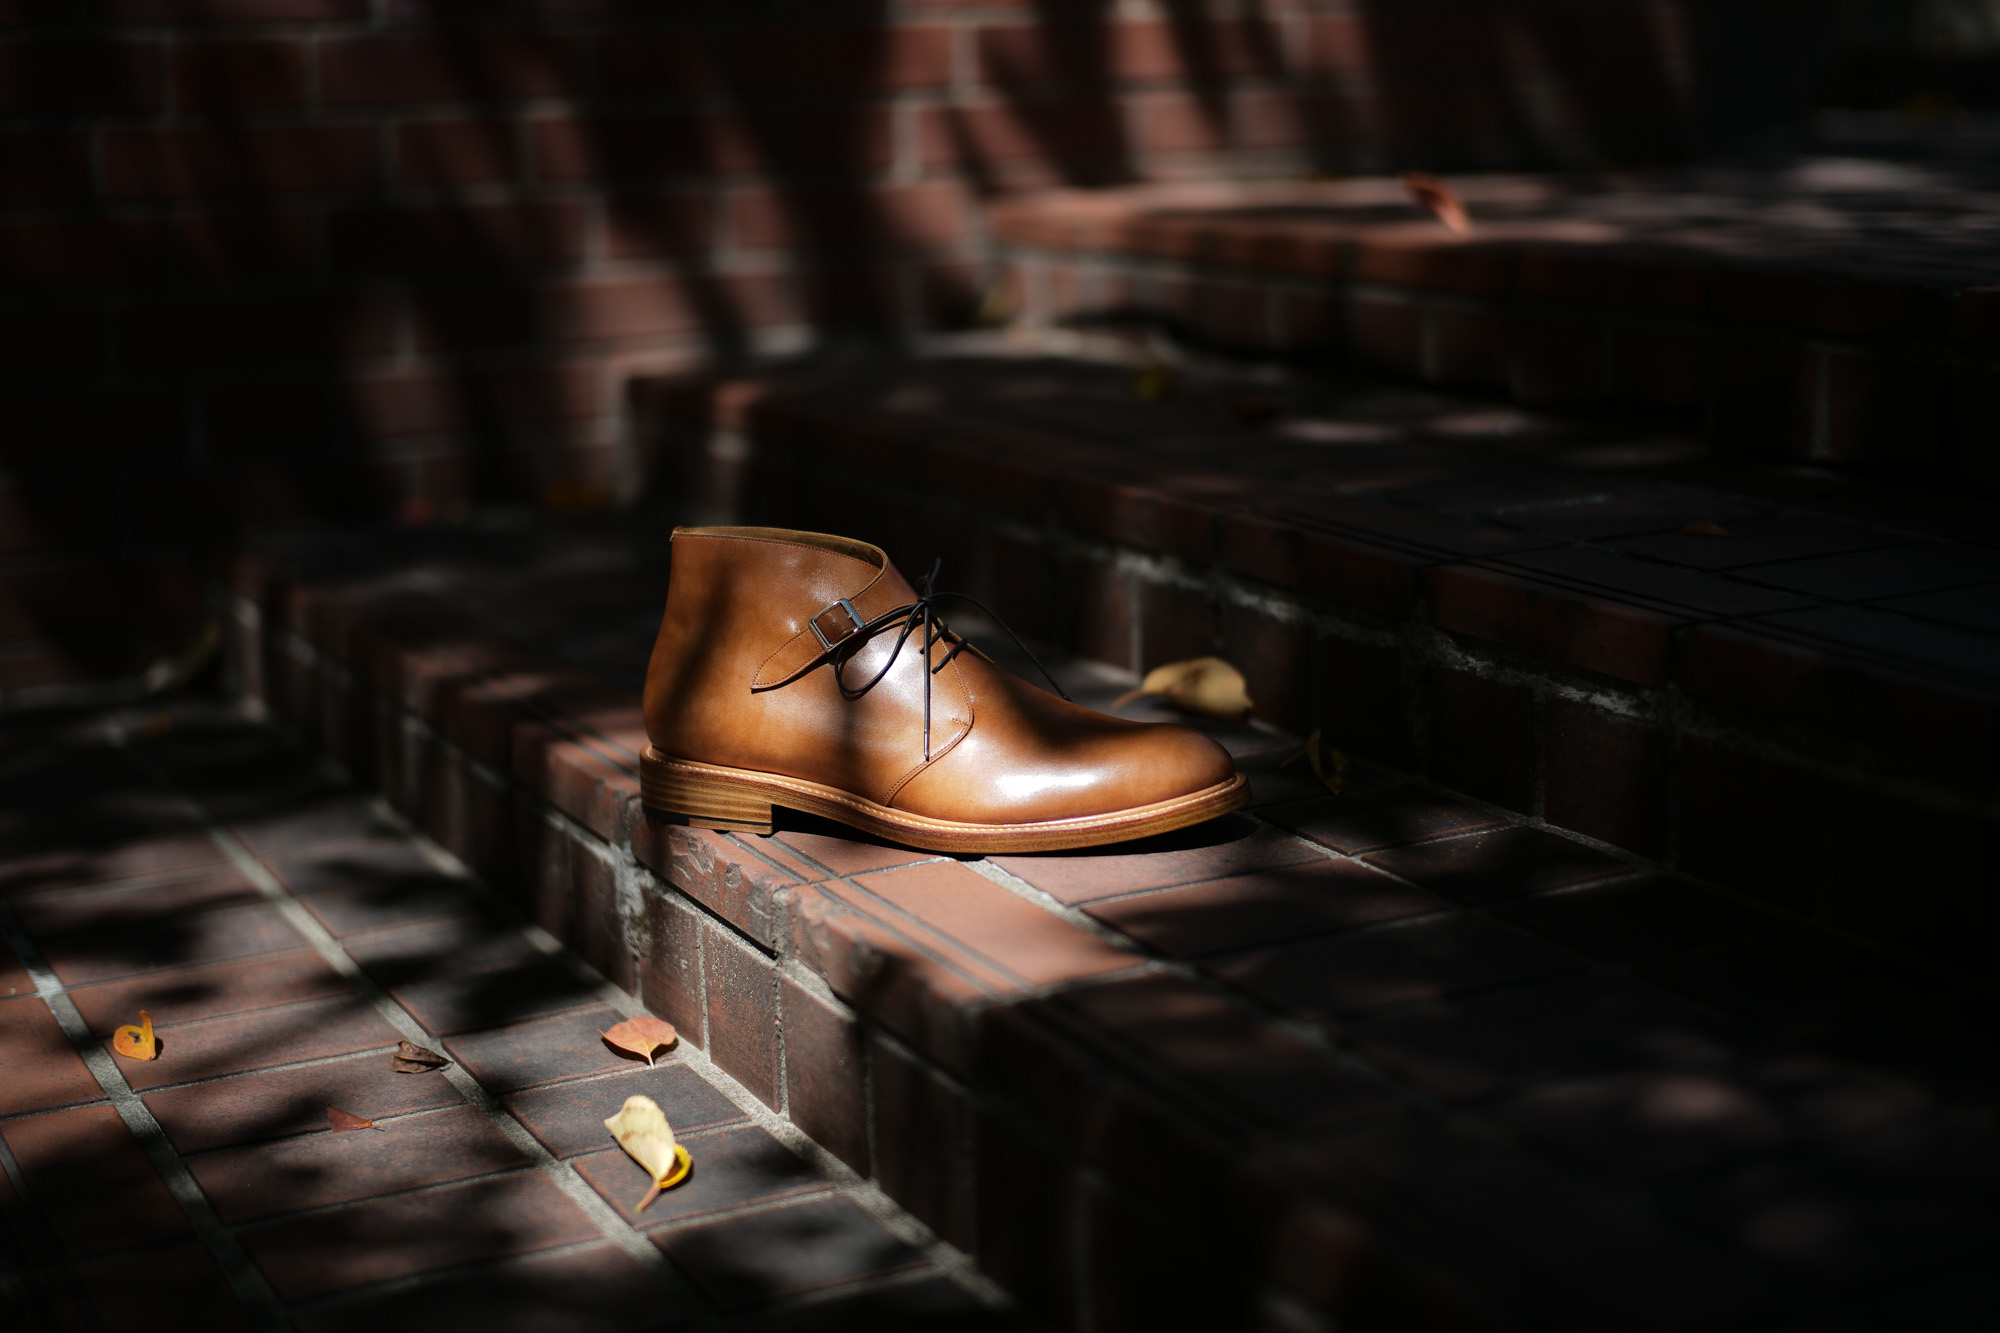 Cuervo (クエルボ)  【2018 SS NEW MODEL】Derringer (デリンジャー) 【Japan Museum Calf Leather//ジャパン ミュージアムカーフレザー】 Goodyear Welt Process Double Leather Sole  Chukkaboots NEW GOLD(ニューゴールド) MADE IN JAPAN 【Special Model 1st sample】　cuervoクエルボ チャッカブーツ 愛知 名古屋 Alto e Diritto アルト エ デリット 5.5,6,6.5,7,7.5,8,8.5,9,9.5